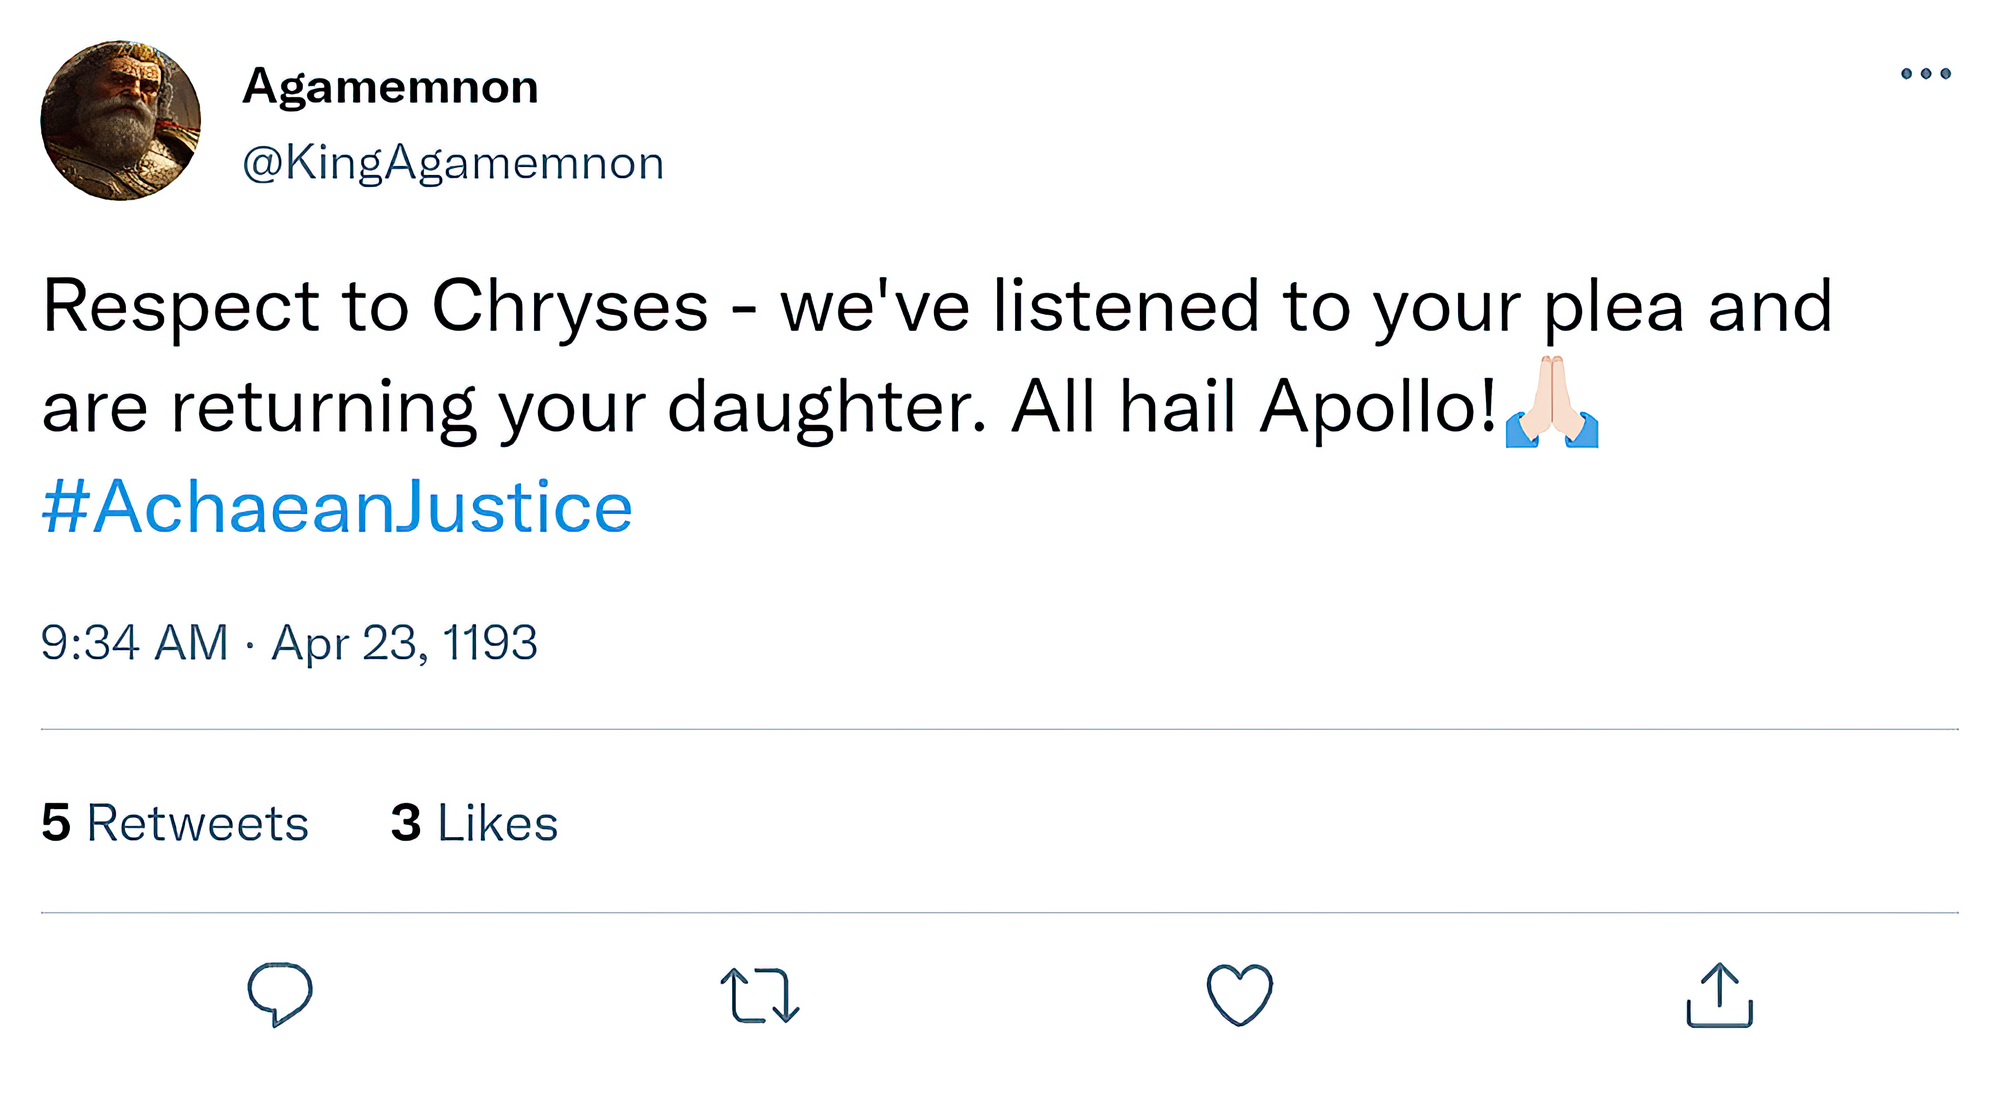 [Tweet] @KingAgamemnon: "Respect to Chryses - we've listened to your plea and are returning your daughter. All hail Apollo!🙏🏻 #AchaeanJustice"